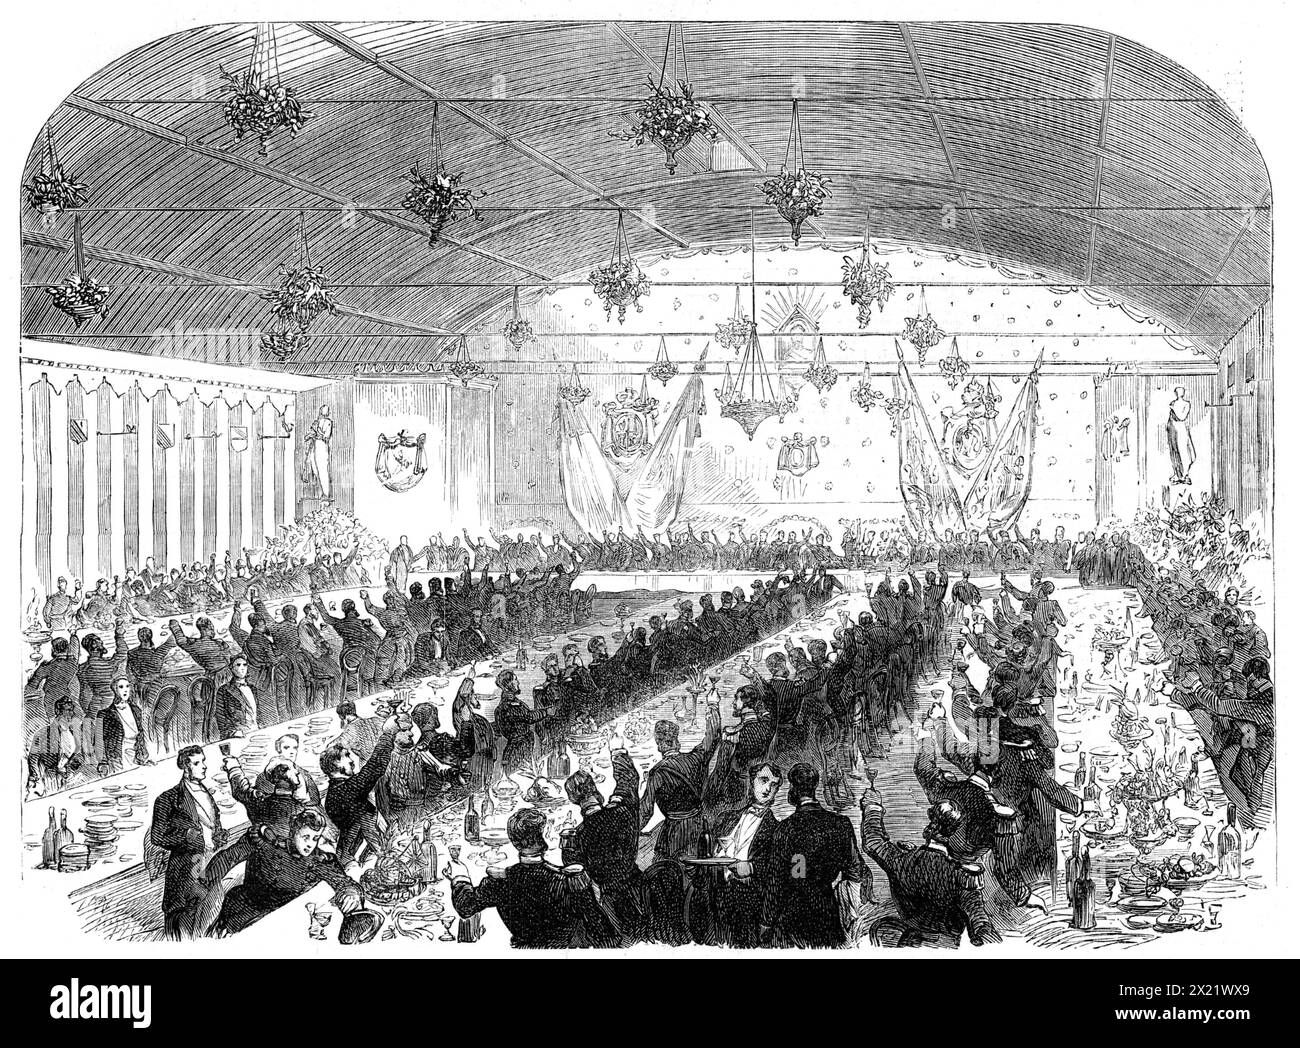 The International Naval Festival at Portsmouth: the Mayor's Banquet to the officers of the French fleet, 1865. 'The decorations, which had been intrusted to Mr. Dillon, of London, were of a novel and effective style...[The banquet was held in] one of Edgington's tents, 138 ft. long and 36 ft. wide, floored over, and lined with crimson and white cloth, also decorated with flags and coloured lamps. At the upper end, behind the Mayor's chair, was a bust of the Emperor Napoleon, above a shield bearing the arms of the town of Portsmouth, with the Mayor's chain and badge. On his right hand were the Stock Photo